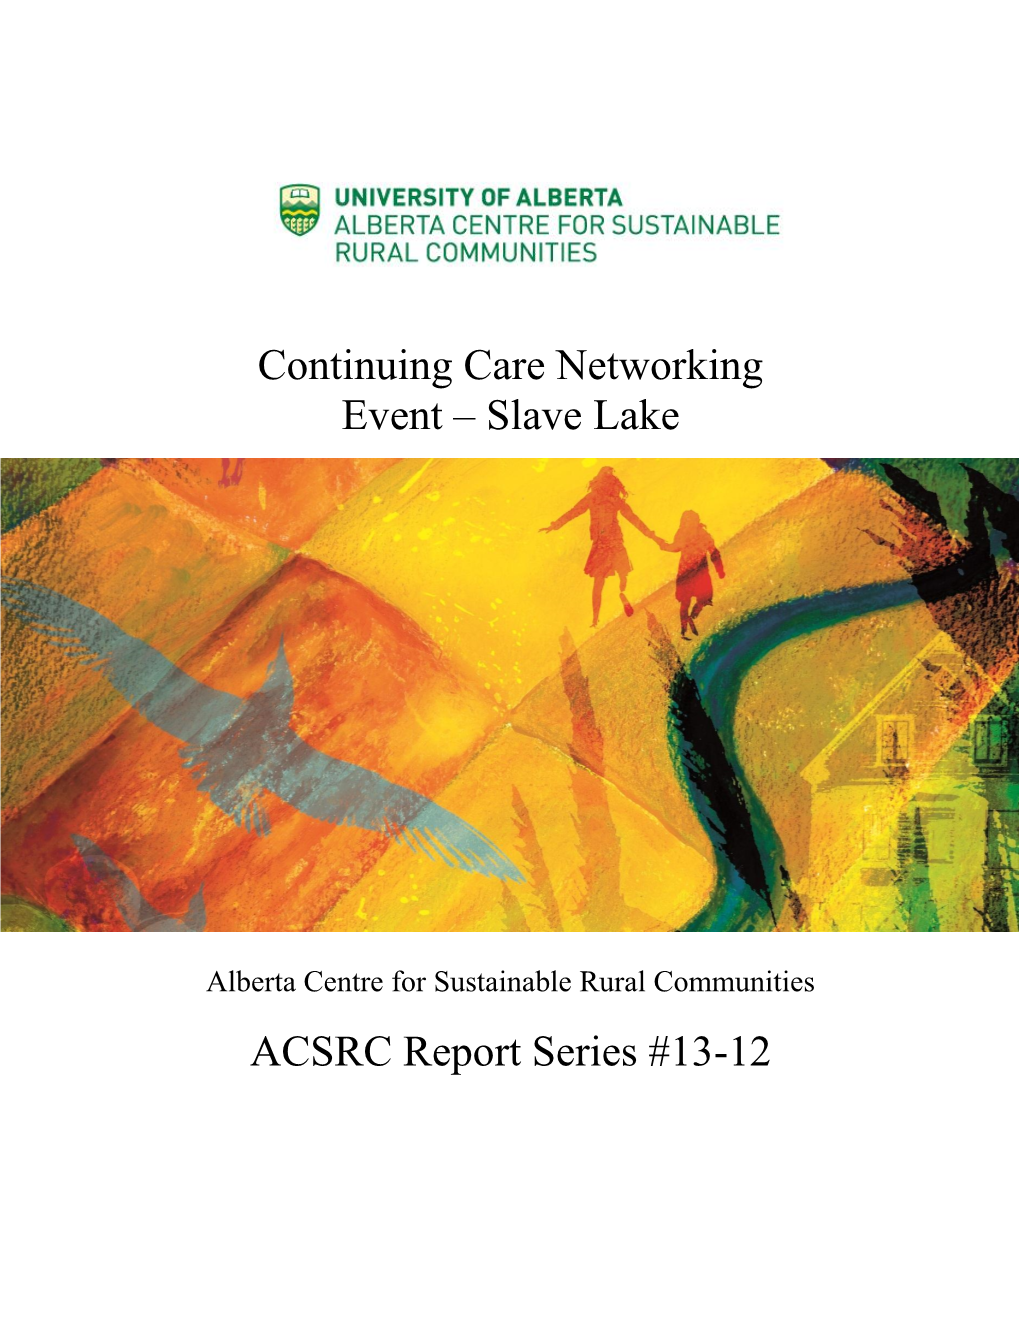 Continuing Care Networking Event – Slave Lake ACSRC Report Series